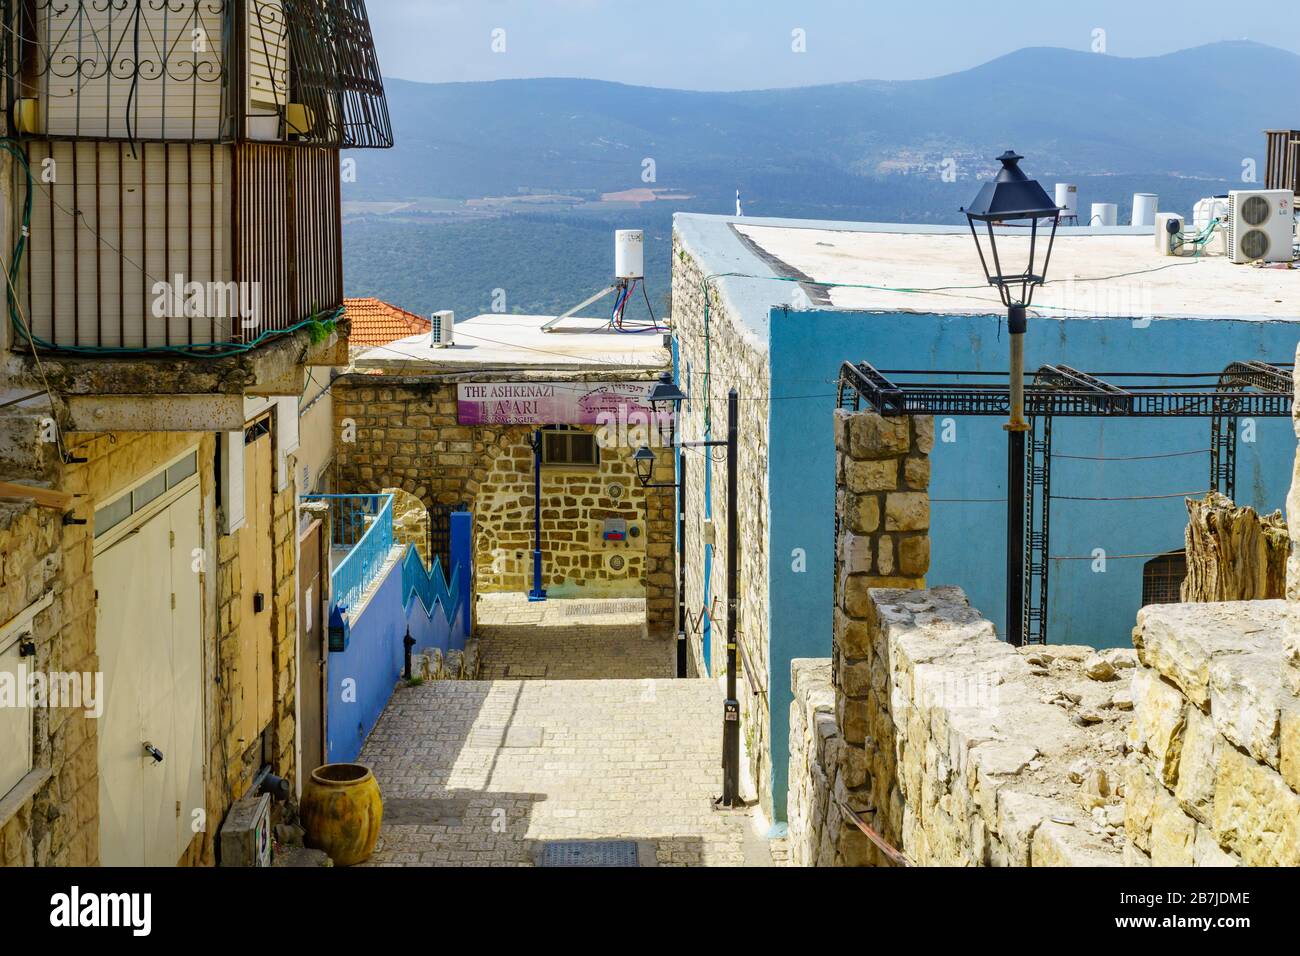 Safed, Israel - March 10, 2020: View of an alley in the Jewish Quarter of the old city of Safed (Tzfat), Israel Stock Photo